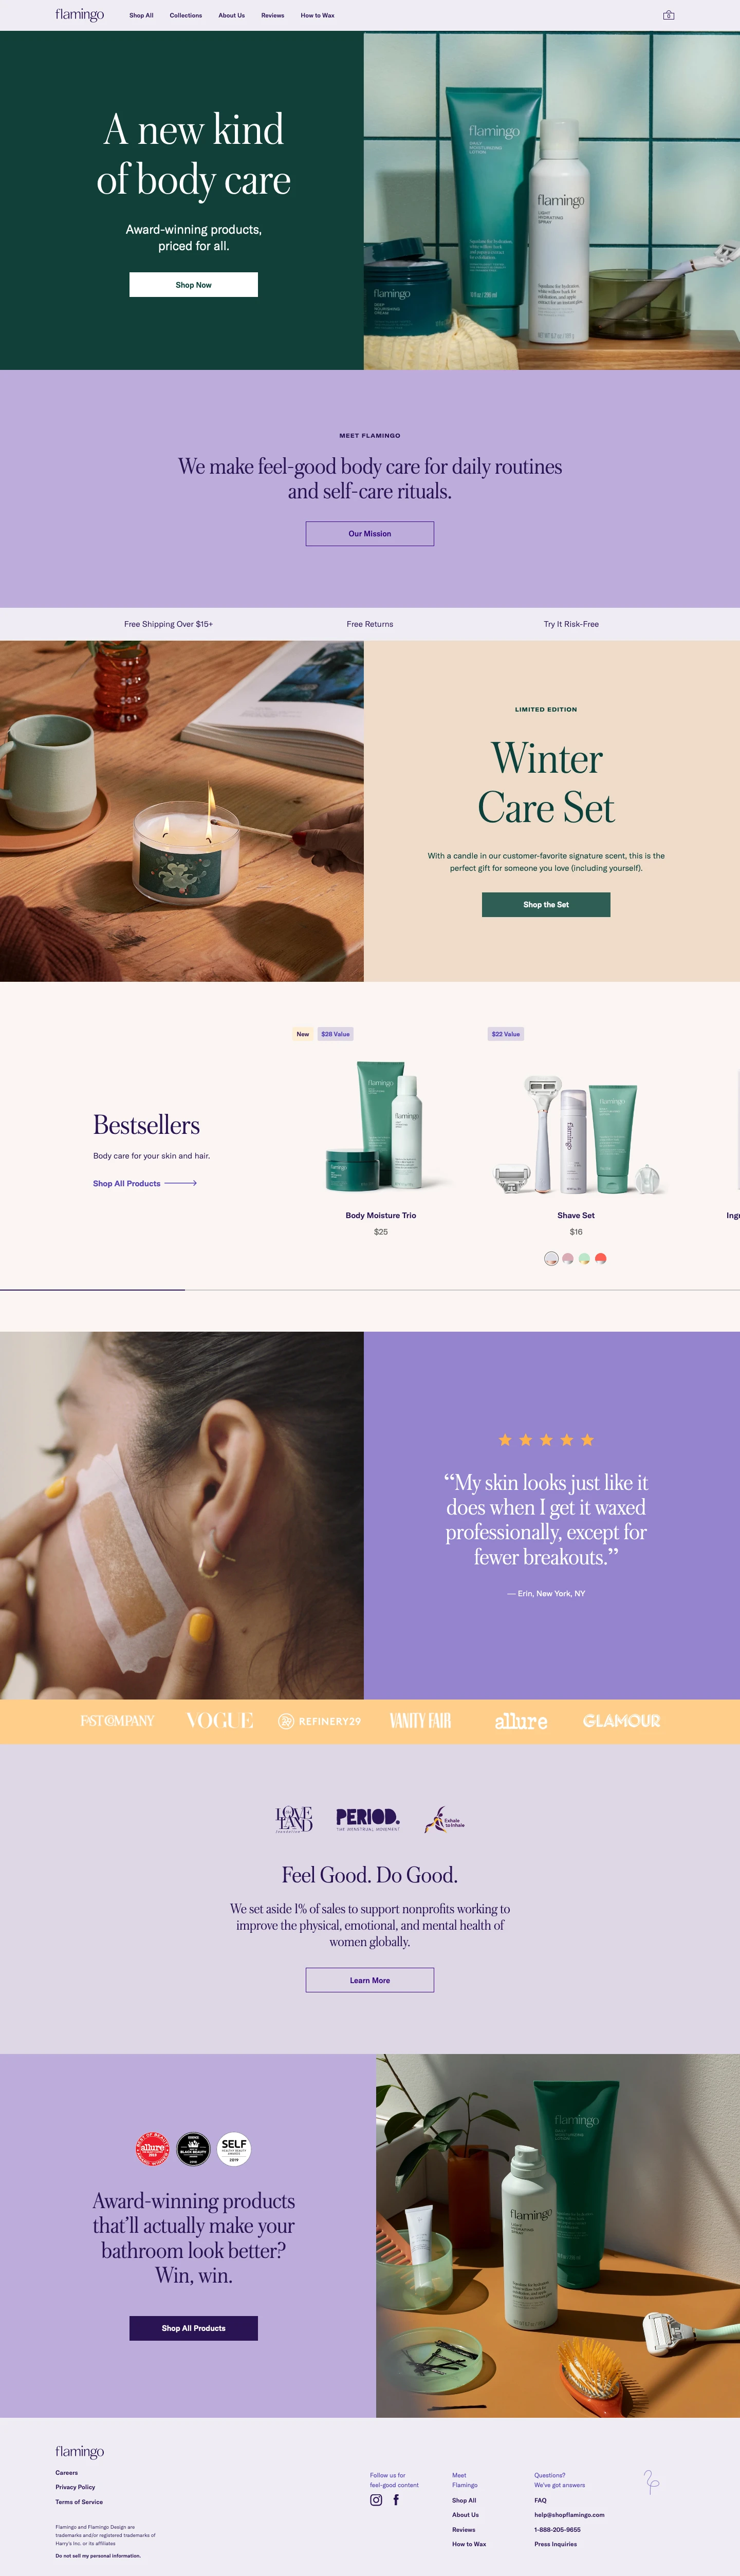 Flamingo Landing Page Example: A new kindof body care. Award-winning products,priced for all.